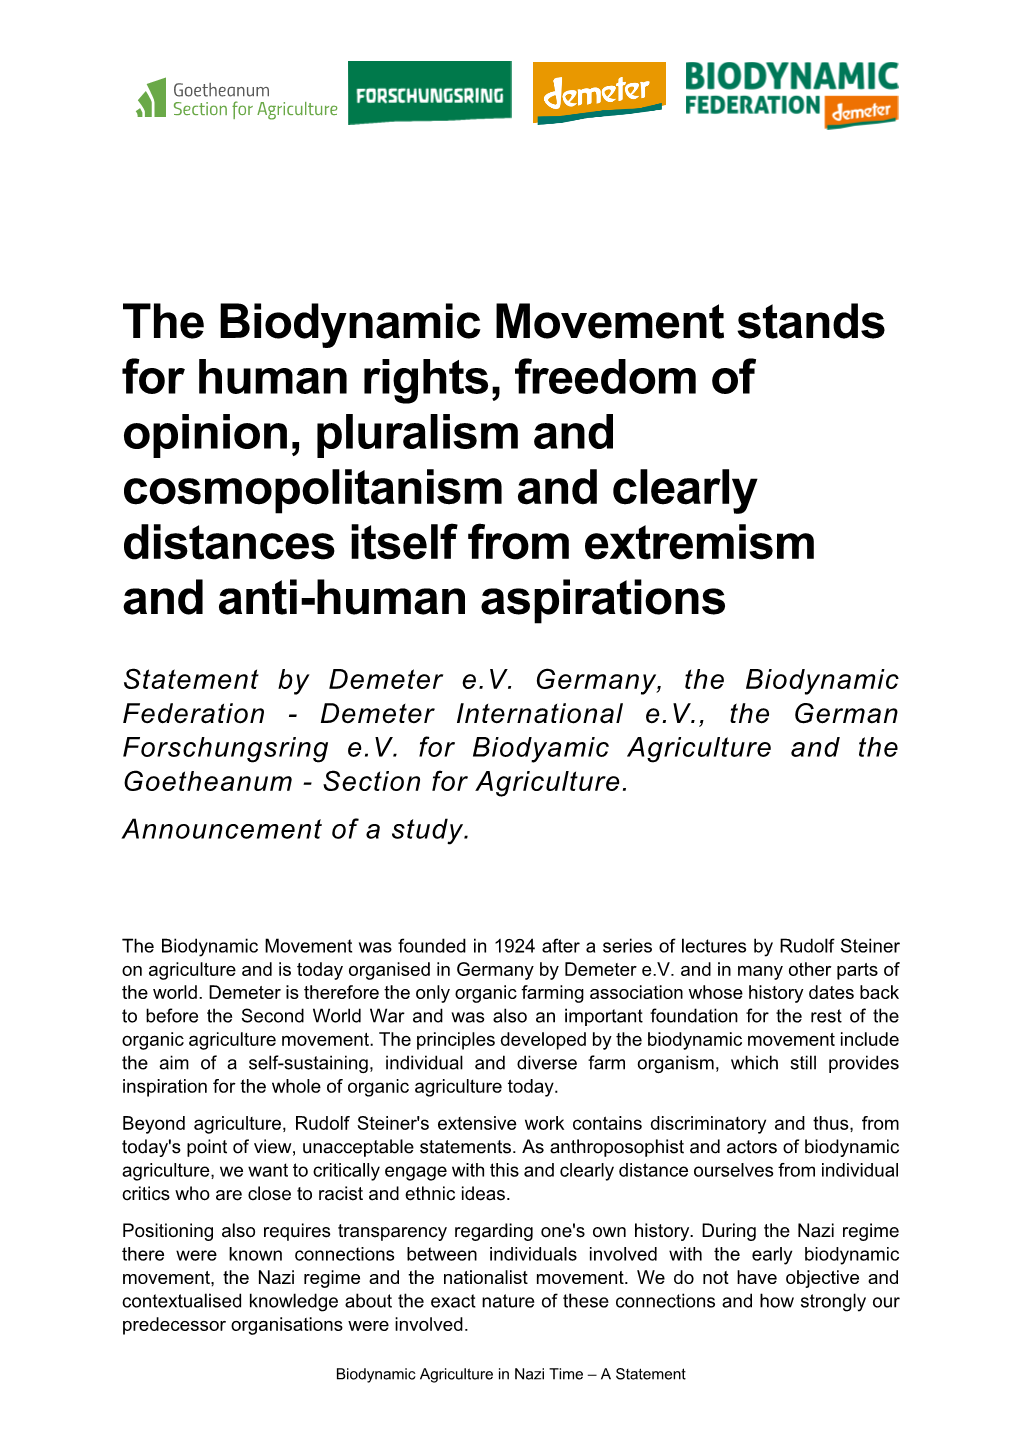 The Biodynamic Movement Stands for Human Rights, Freedom of Opinion, Pluralism and Cosmopolitanism and Clearly Distances Itself